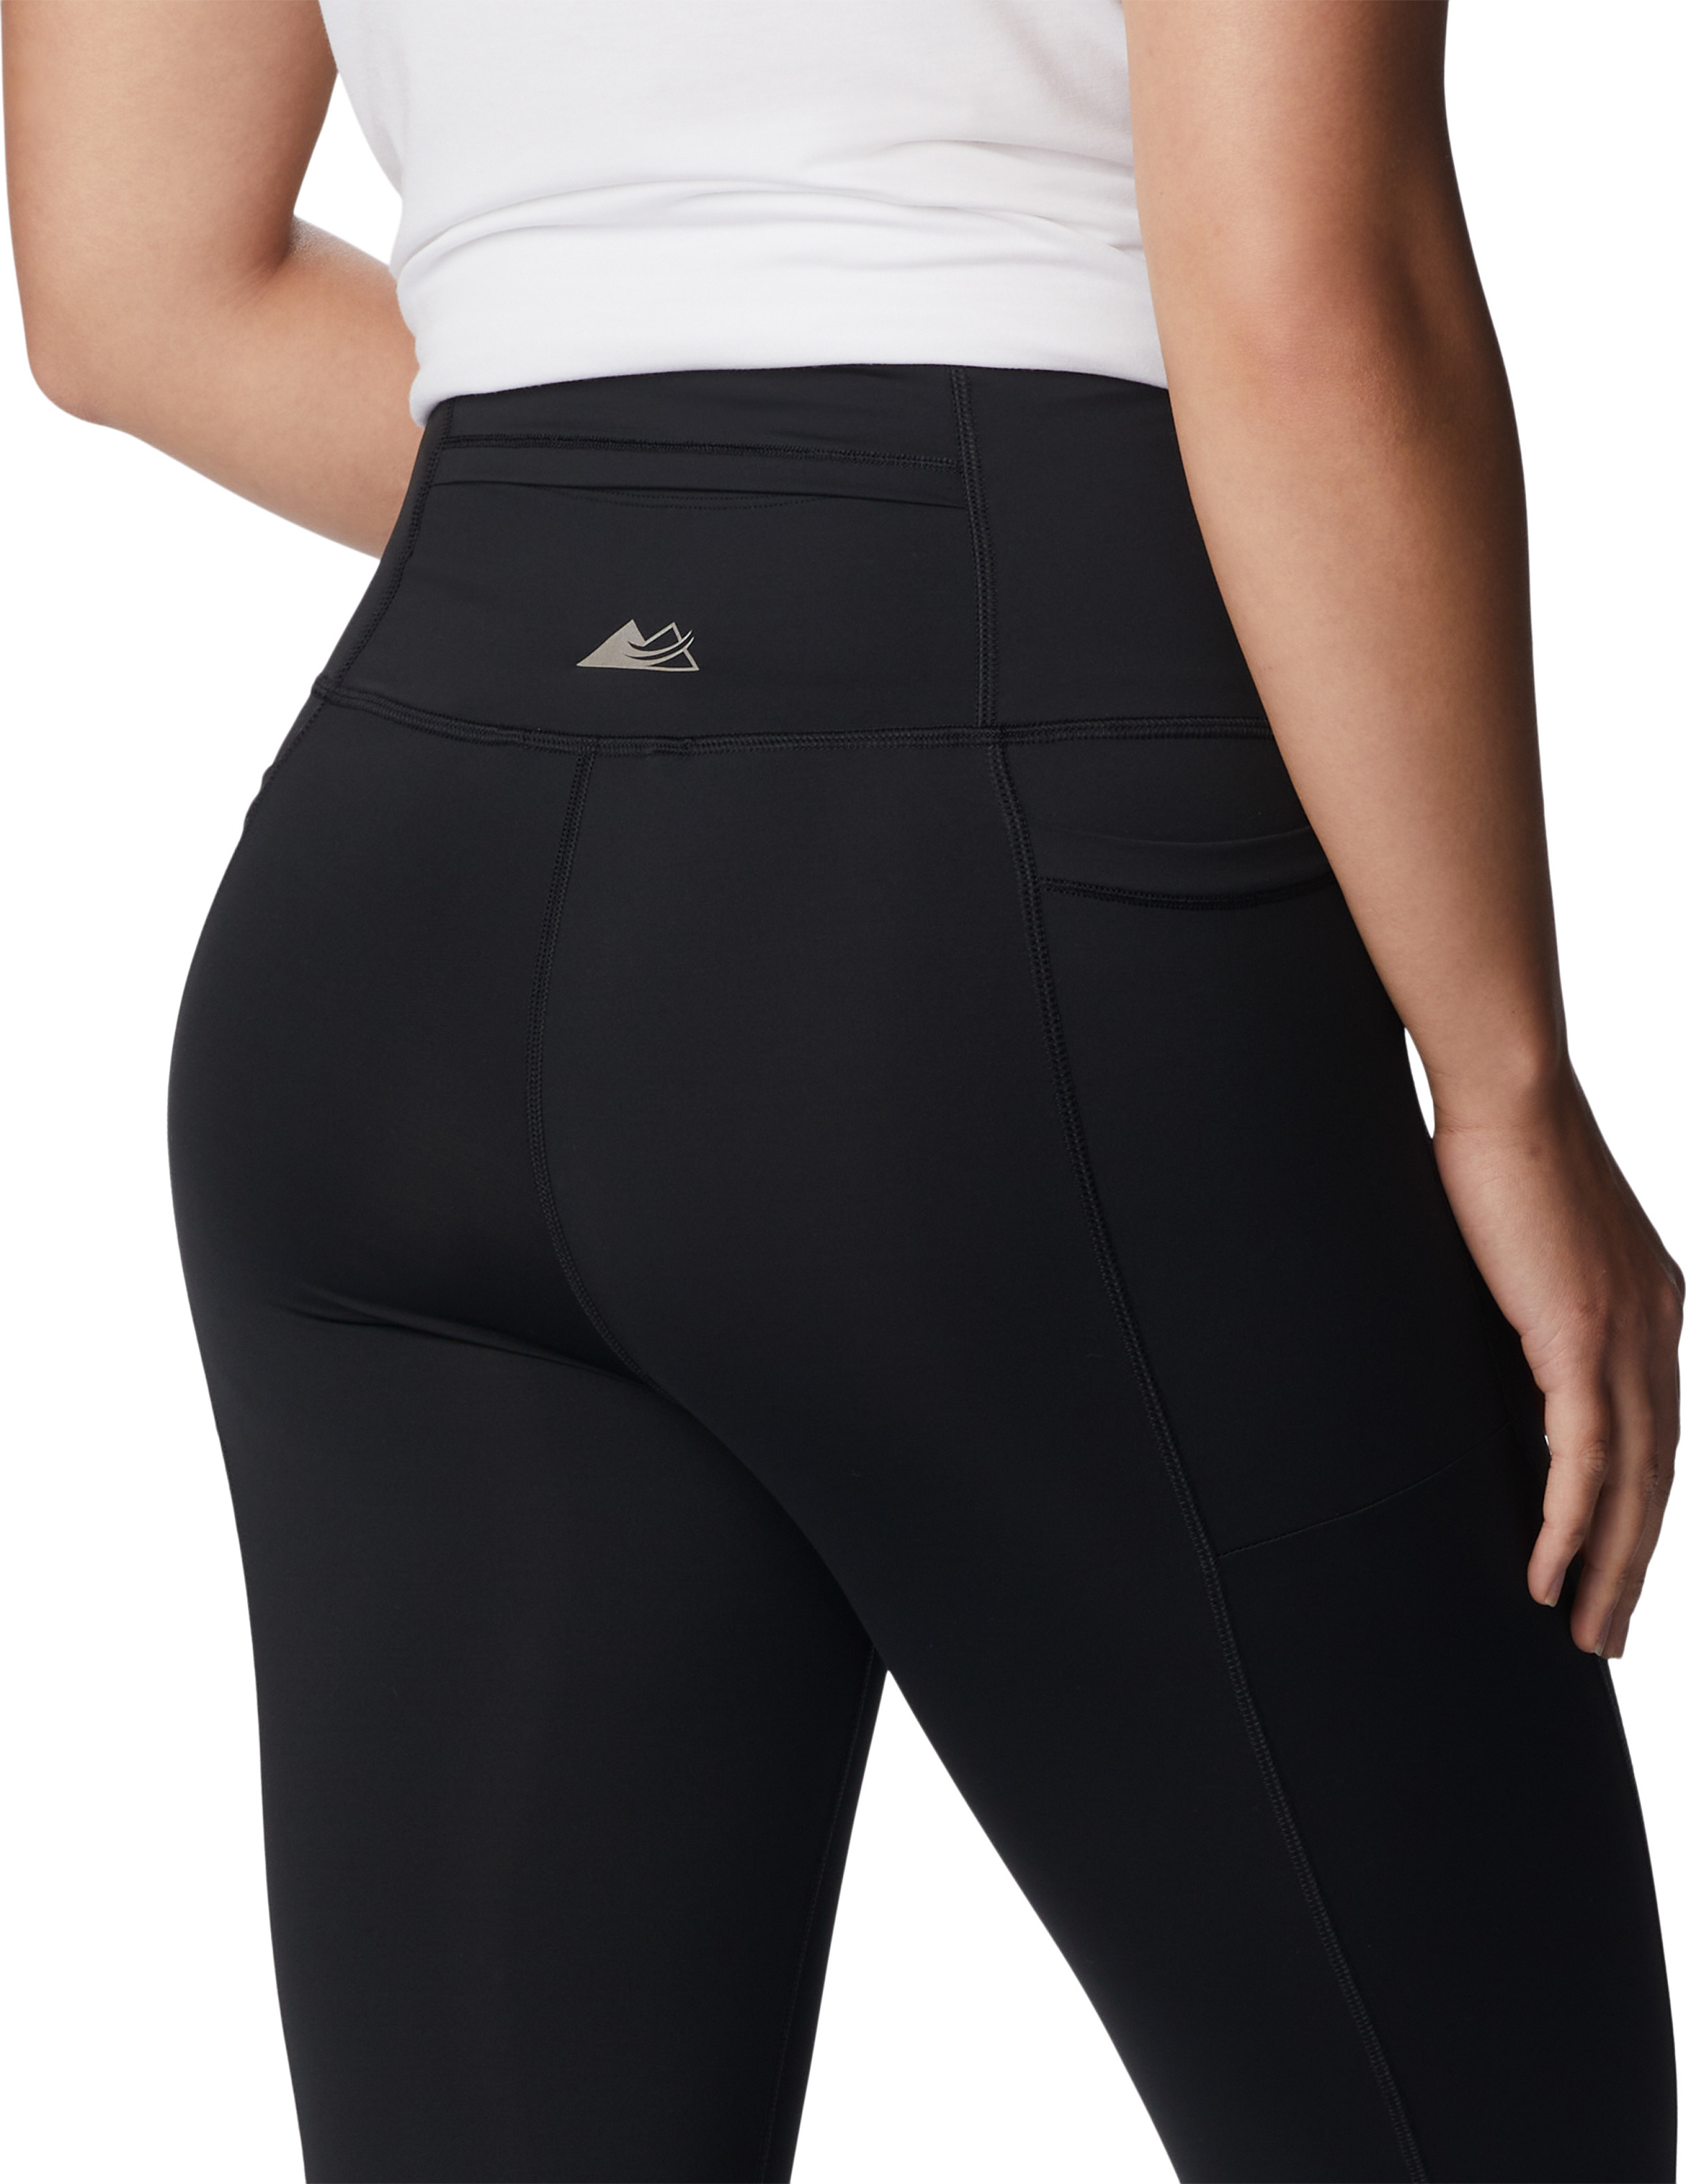 Buy a Reebok Womens Highrise Running Compression Athletic Pants